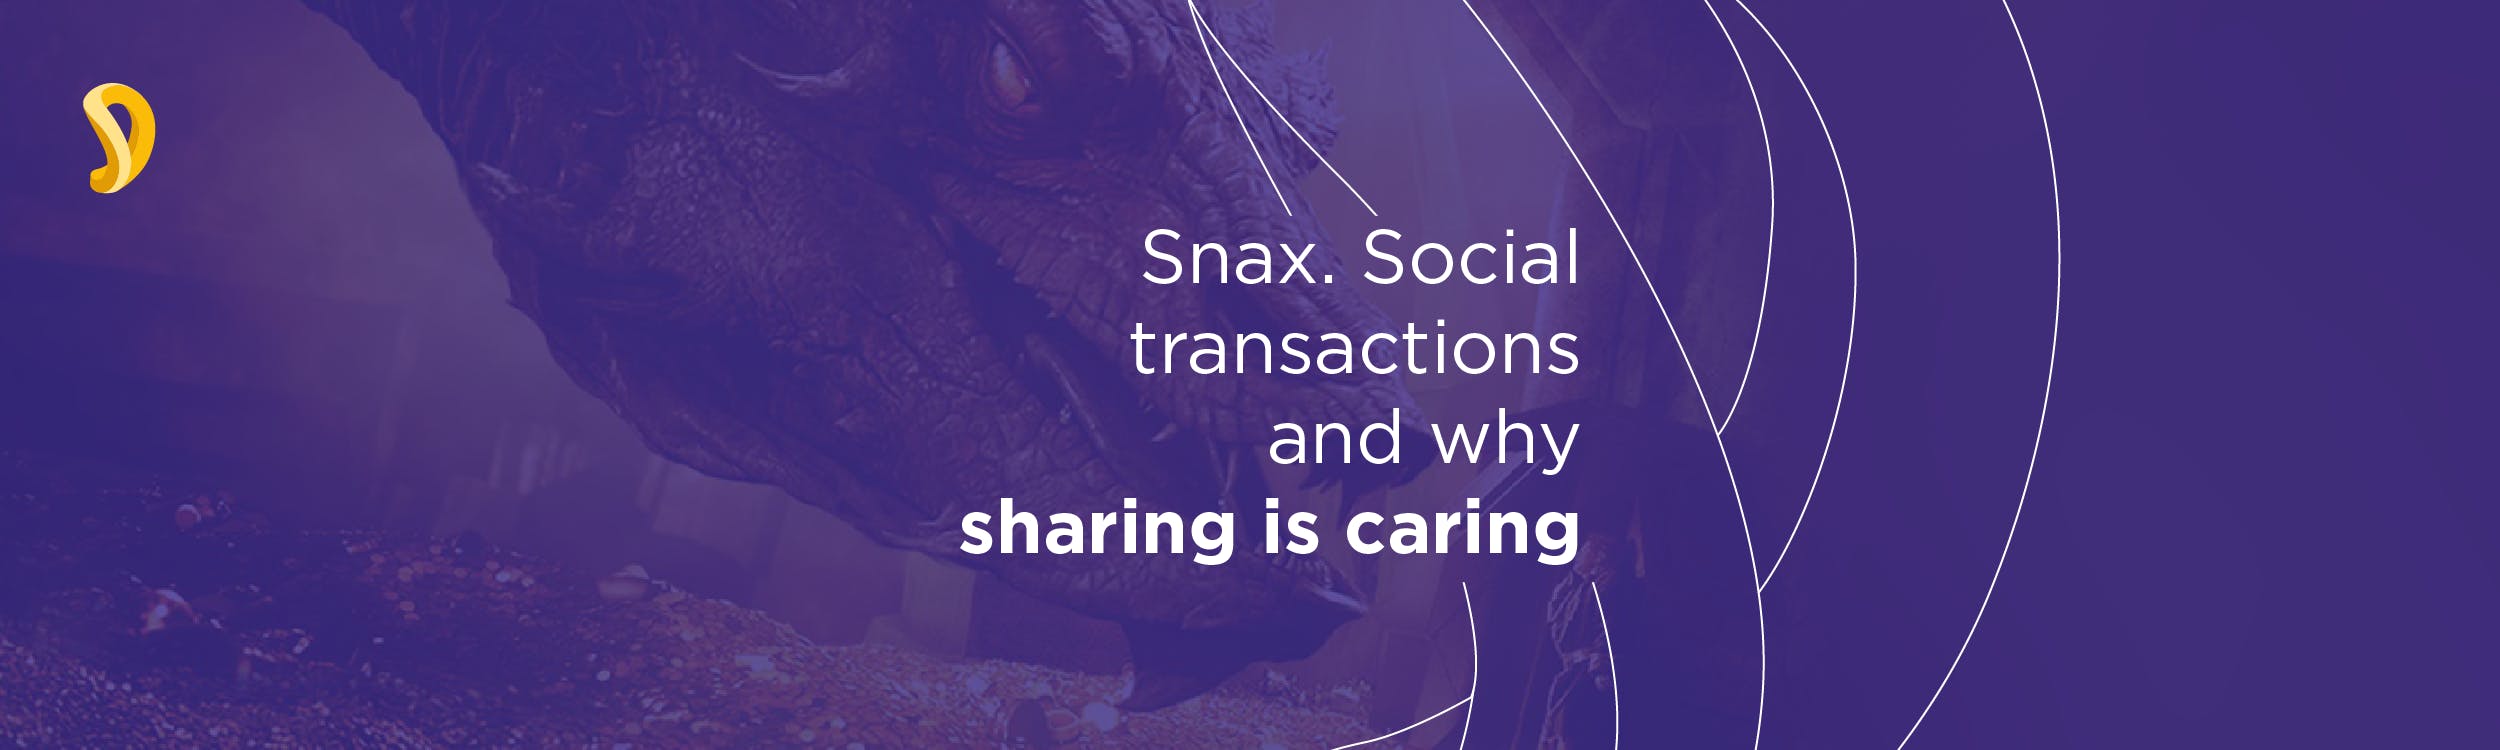 /snax-social-transaction-and-why-sharing-is-caring-afc32c8f1646 feature image